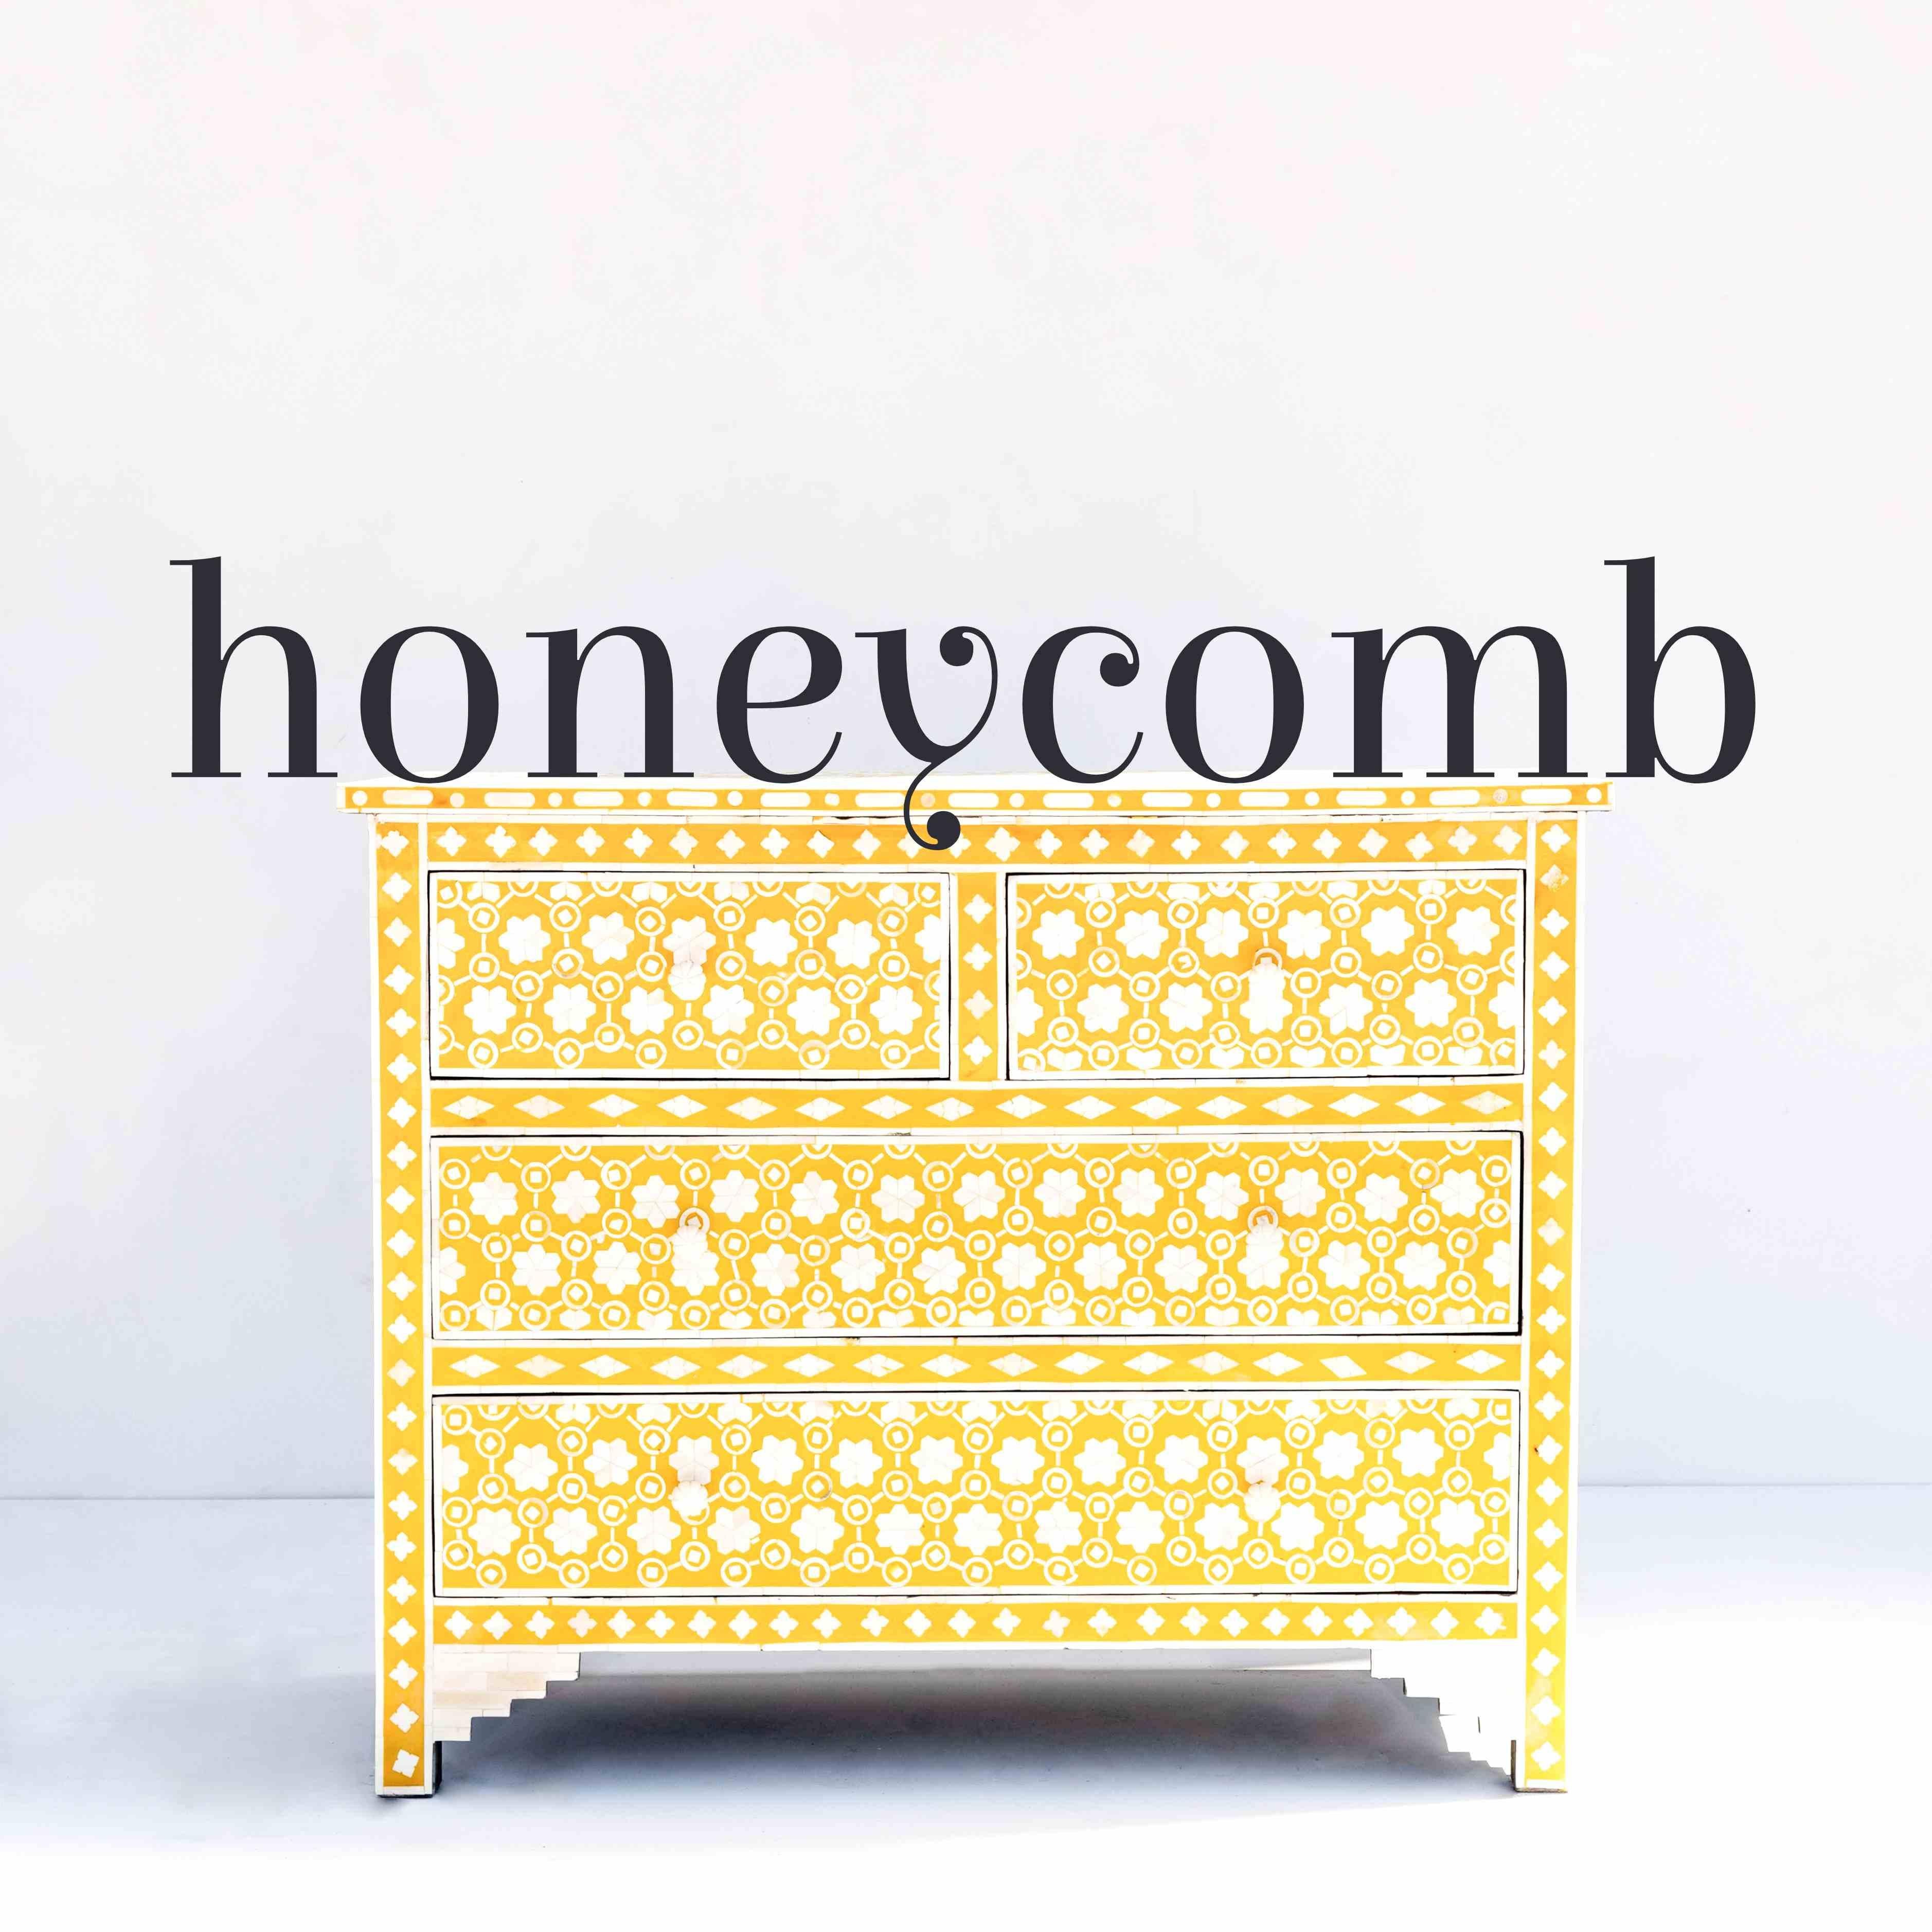 Introducing our exquisite Bone Inlay Dresser, an undeniable statement piece for any bedroom or living room. This stunning four drawer dresser is entirely handmade, featuring intricate bone inlay honeycomb flower patterns that are nothing short of